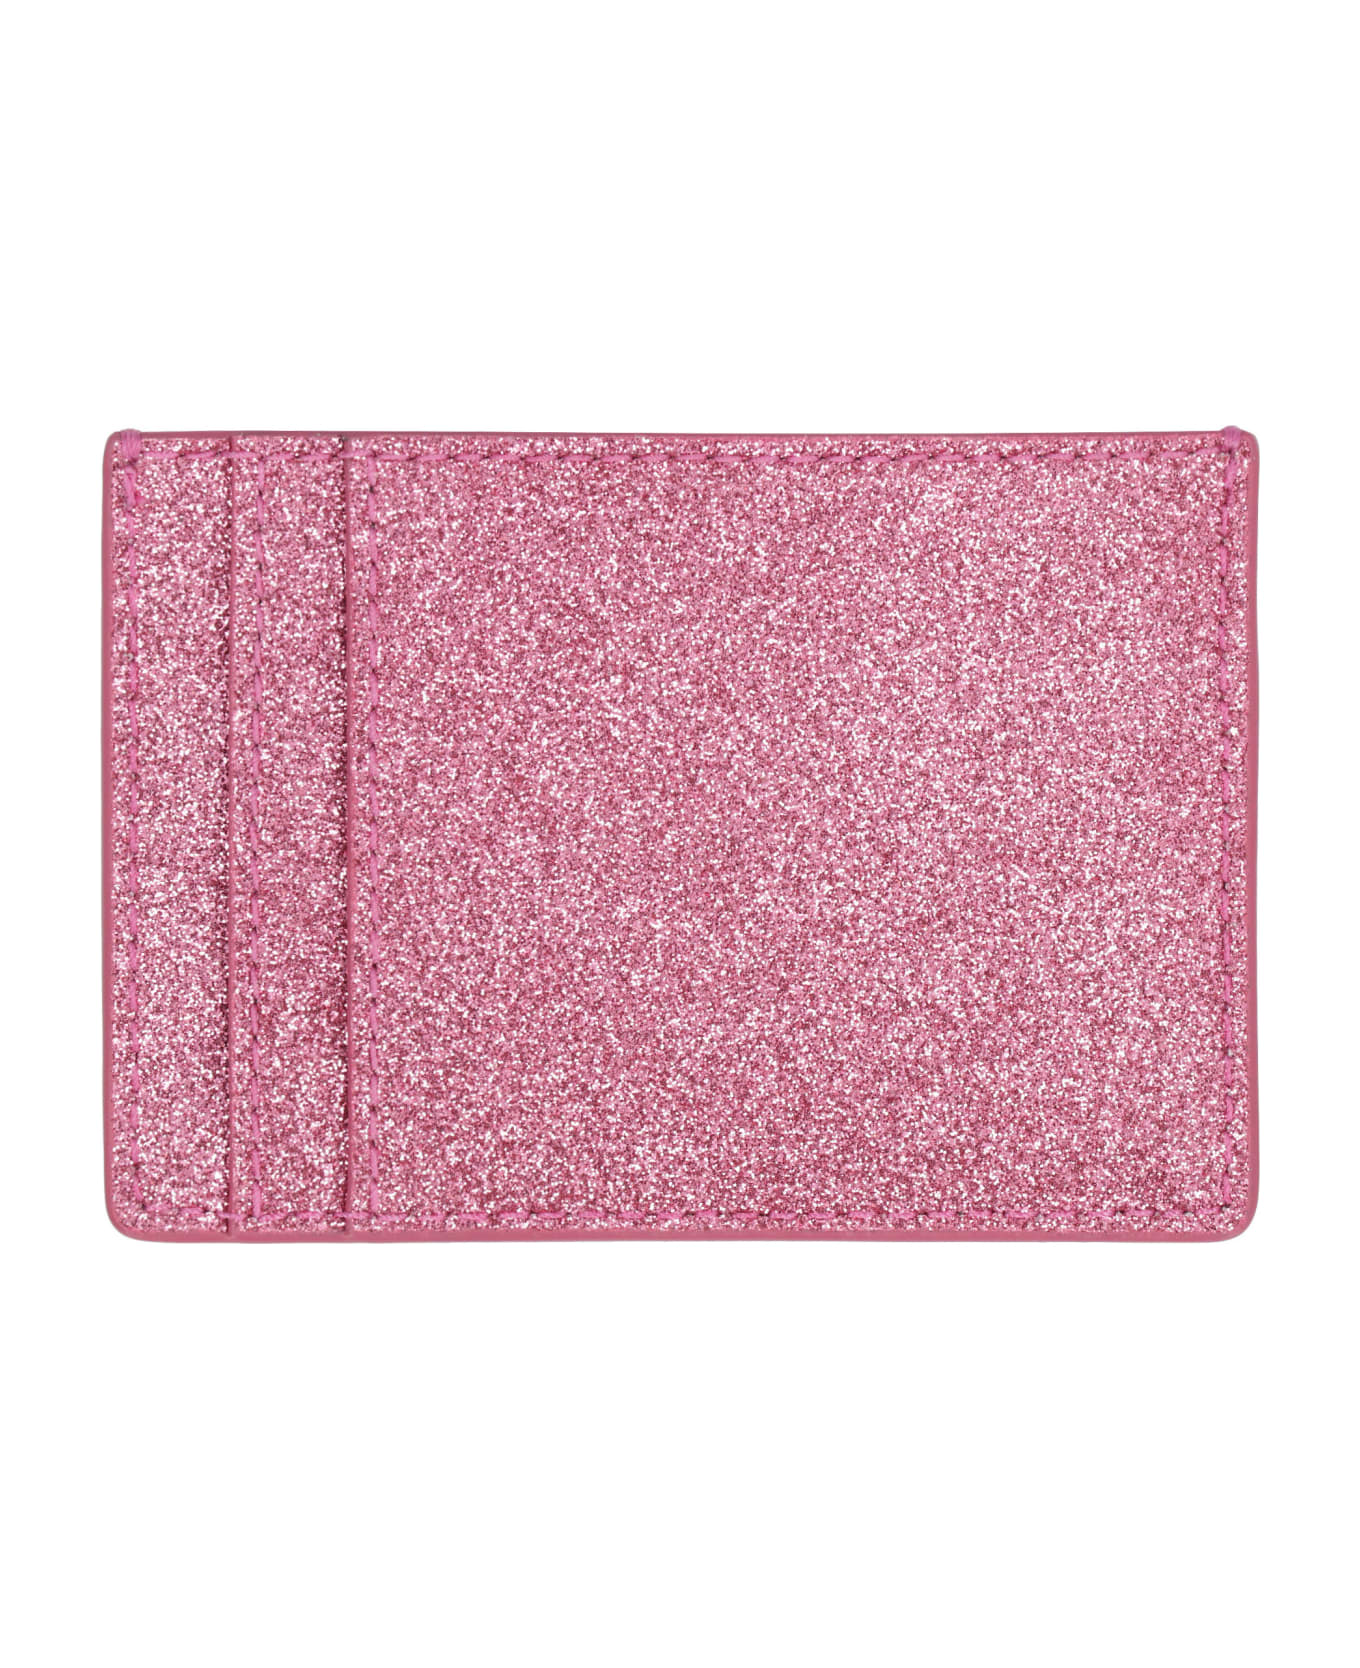 Marc Jacobs The Galactic Leather Card Holder - Fuchsia